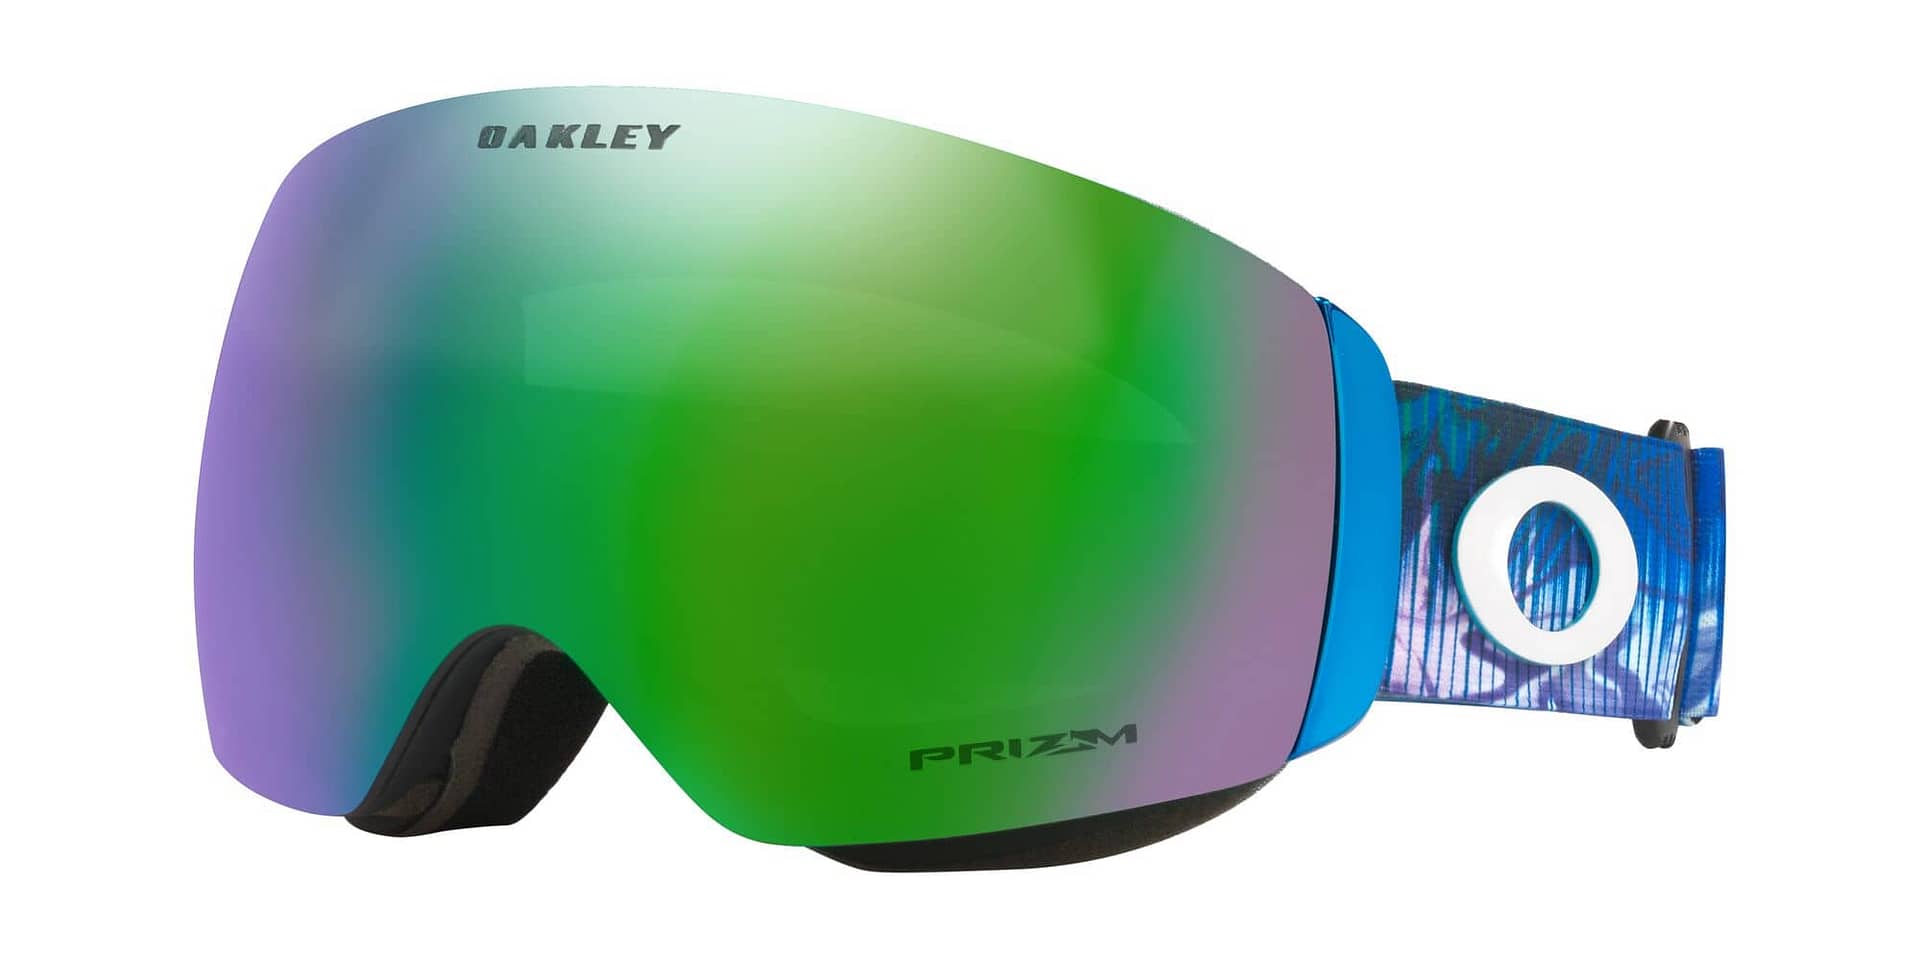 New Oakley 2022 Snow Collection Developed And Designed By Top Athletes ...